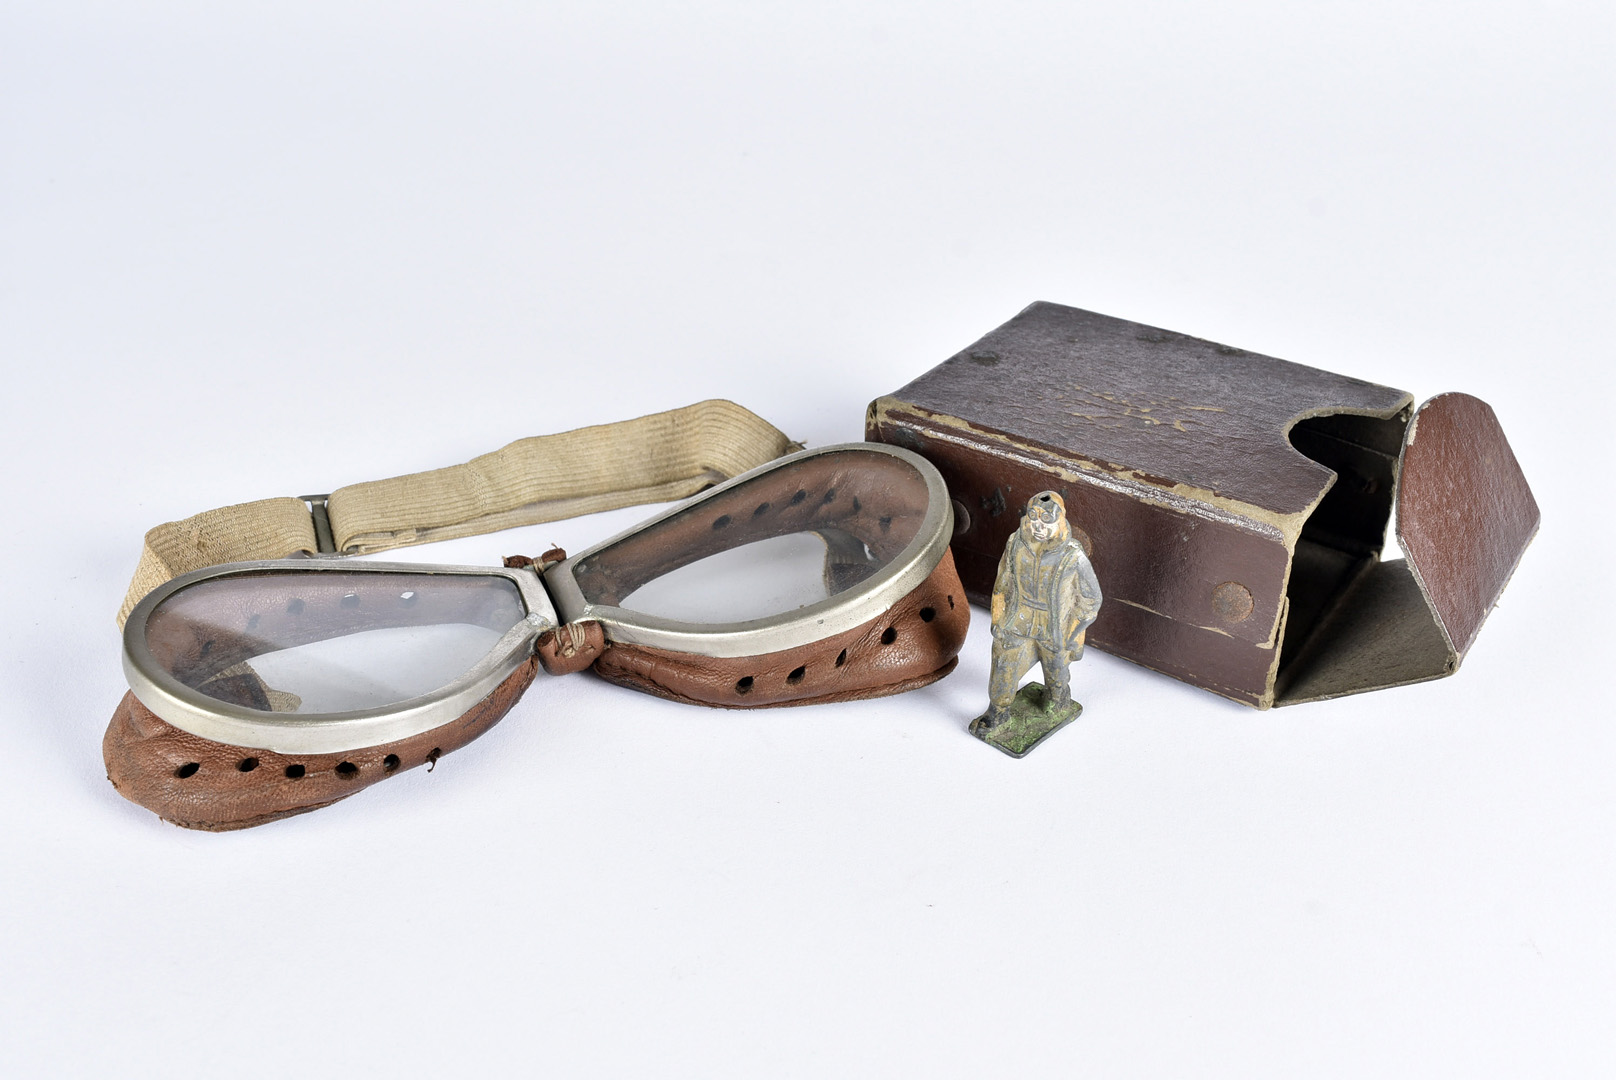 A pair of vintage driving/aviation goggles, having white metal rims with leather sides and